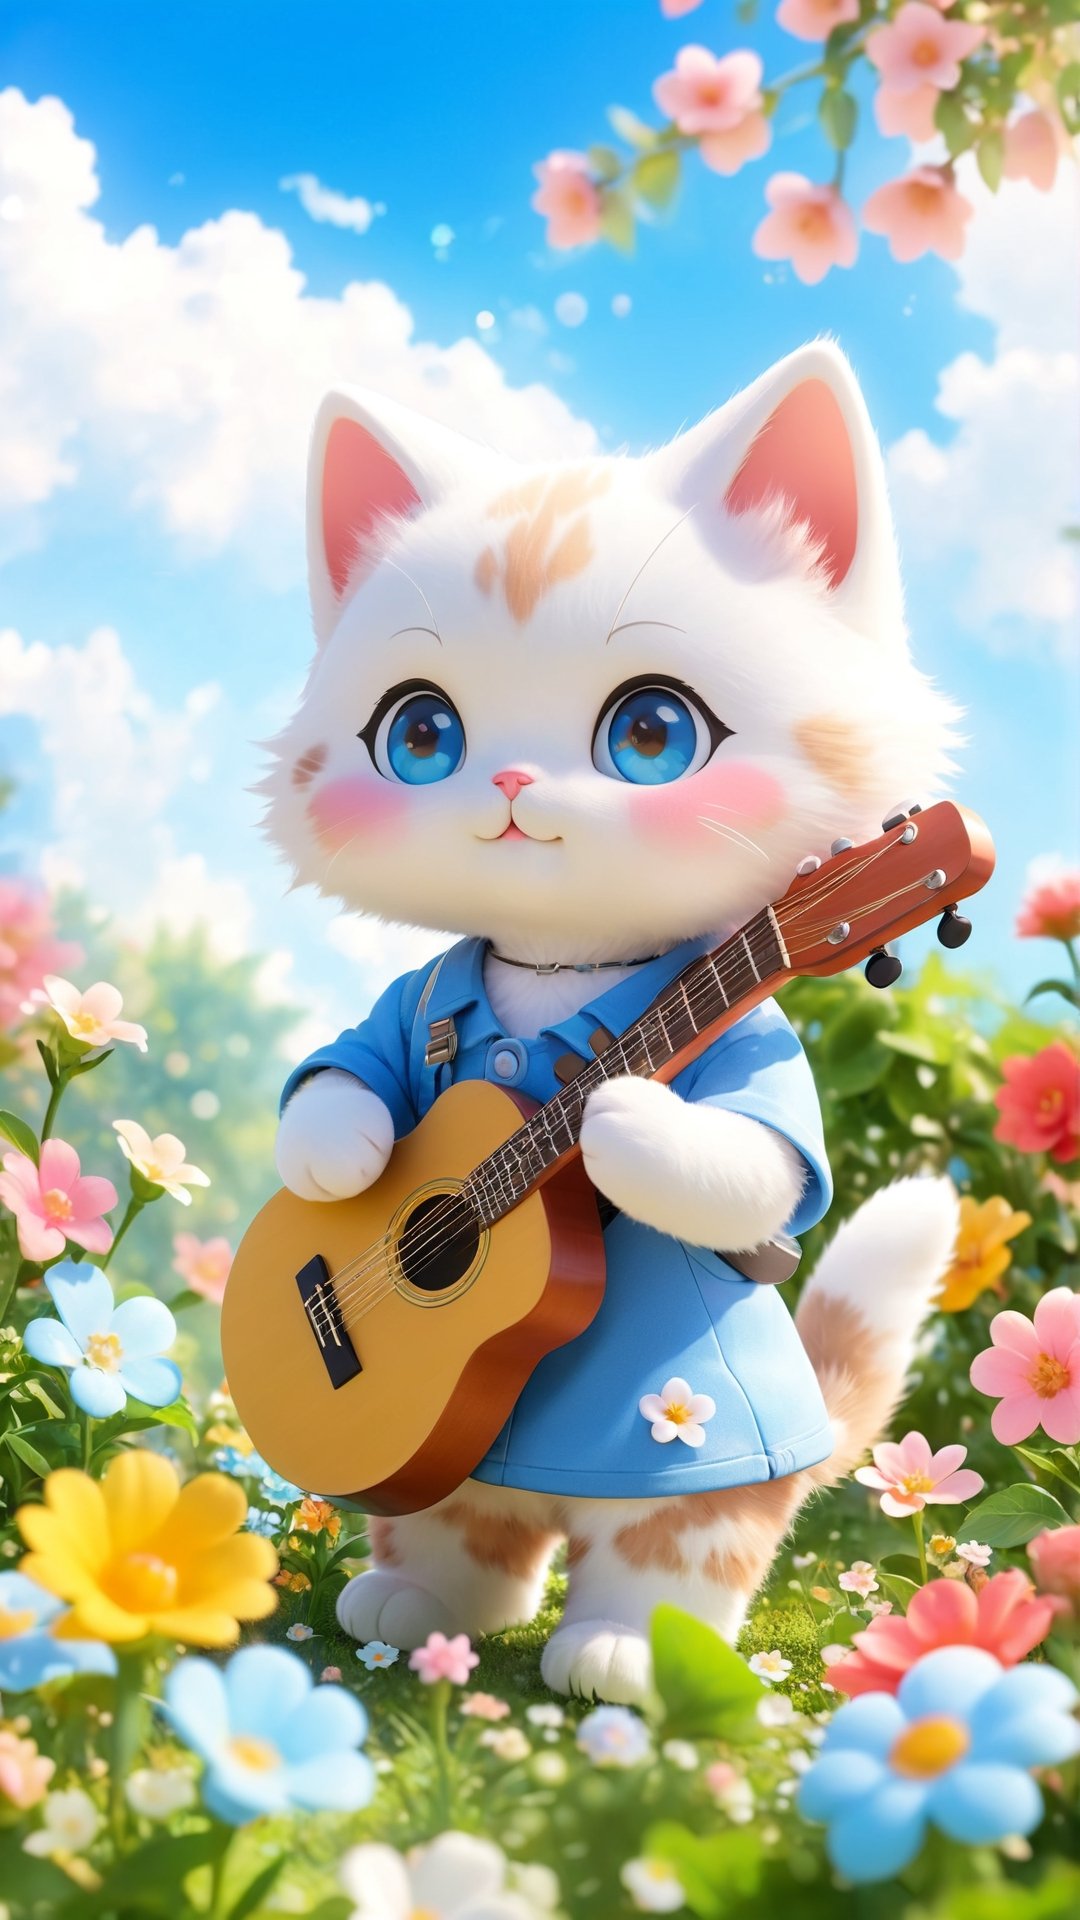 Chibi mascot includes the best quality, Beautiful soft light, (beautiful and delicate eyes), very detailed, Cute Kitten wears casual, playing the guitar in the flowers bloom garden, full body, real photo, cinematic,Xxmix_Catecat, lighting bokeh and flowers bokeh as background, blue sky and white clouds